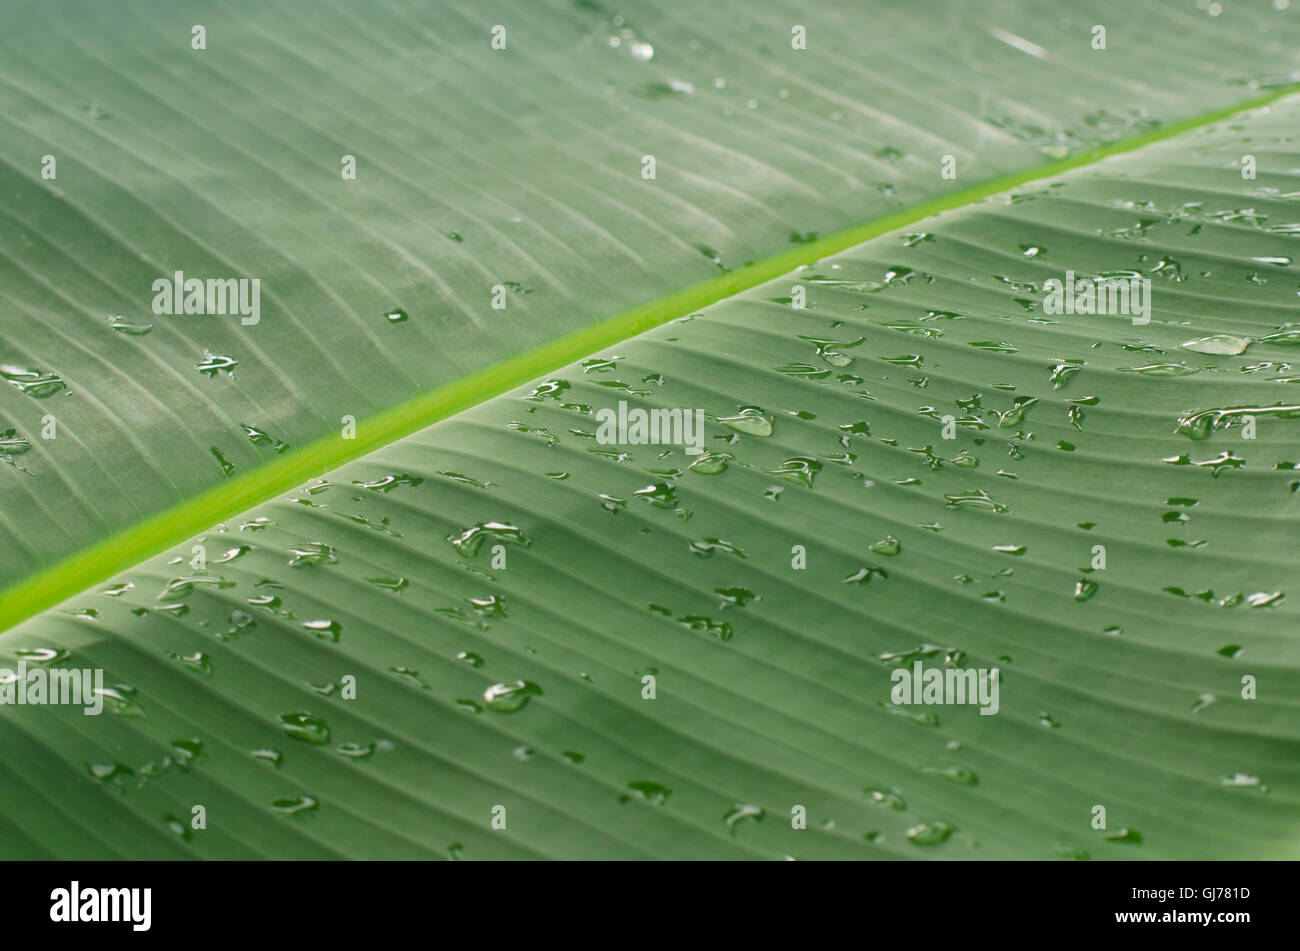 Beautiful water drops on a bright green banana leaf. Stock Photo